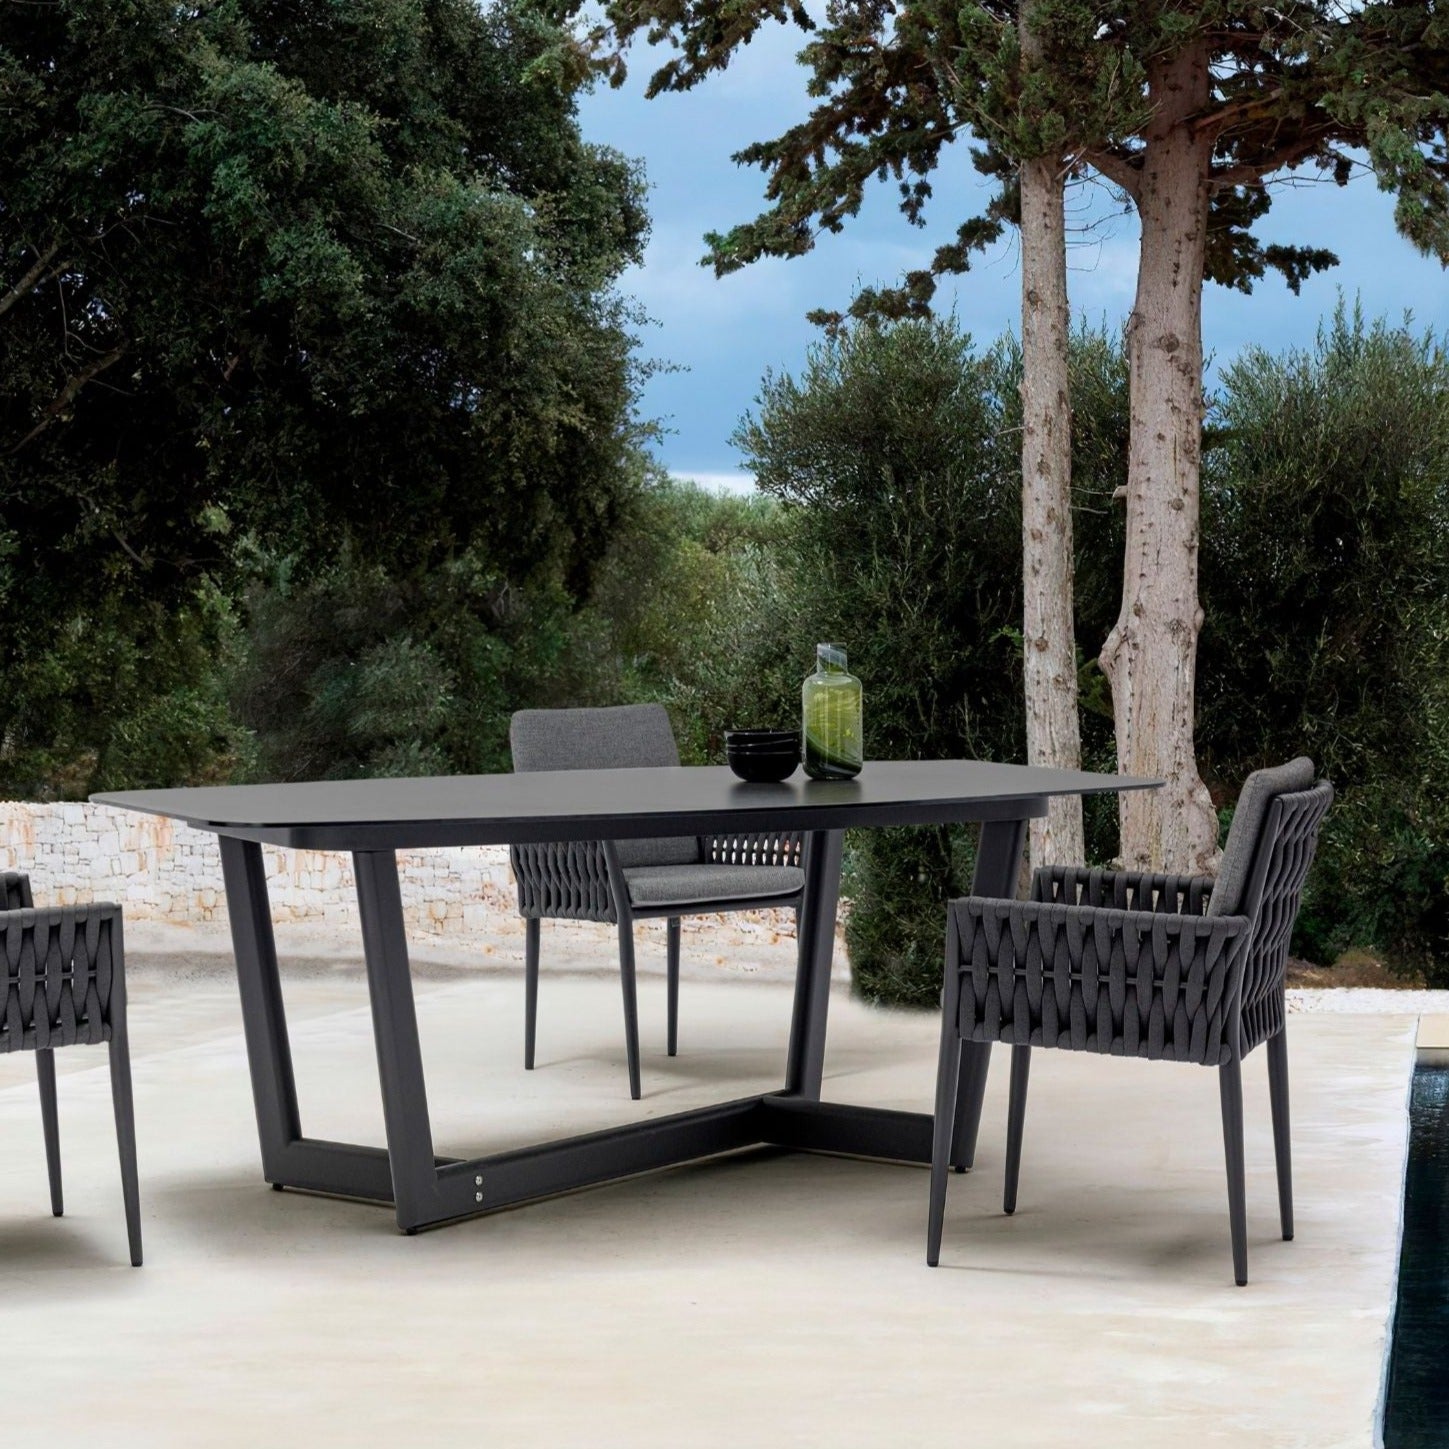 Hug Series | Outdoor Rectangular Dining Table - The Feelter